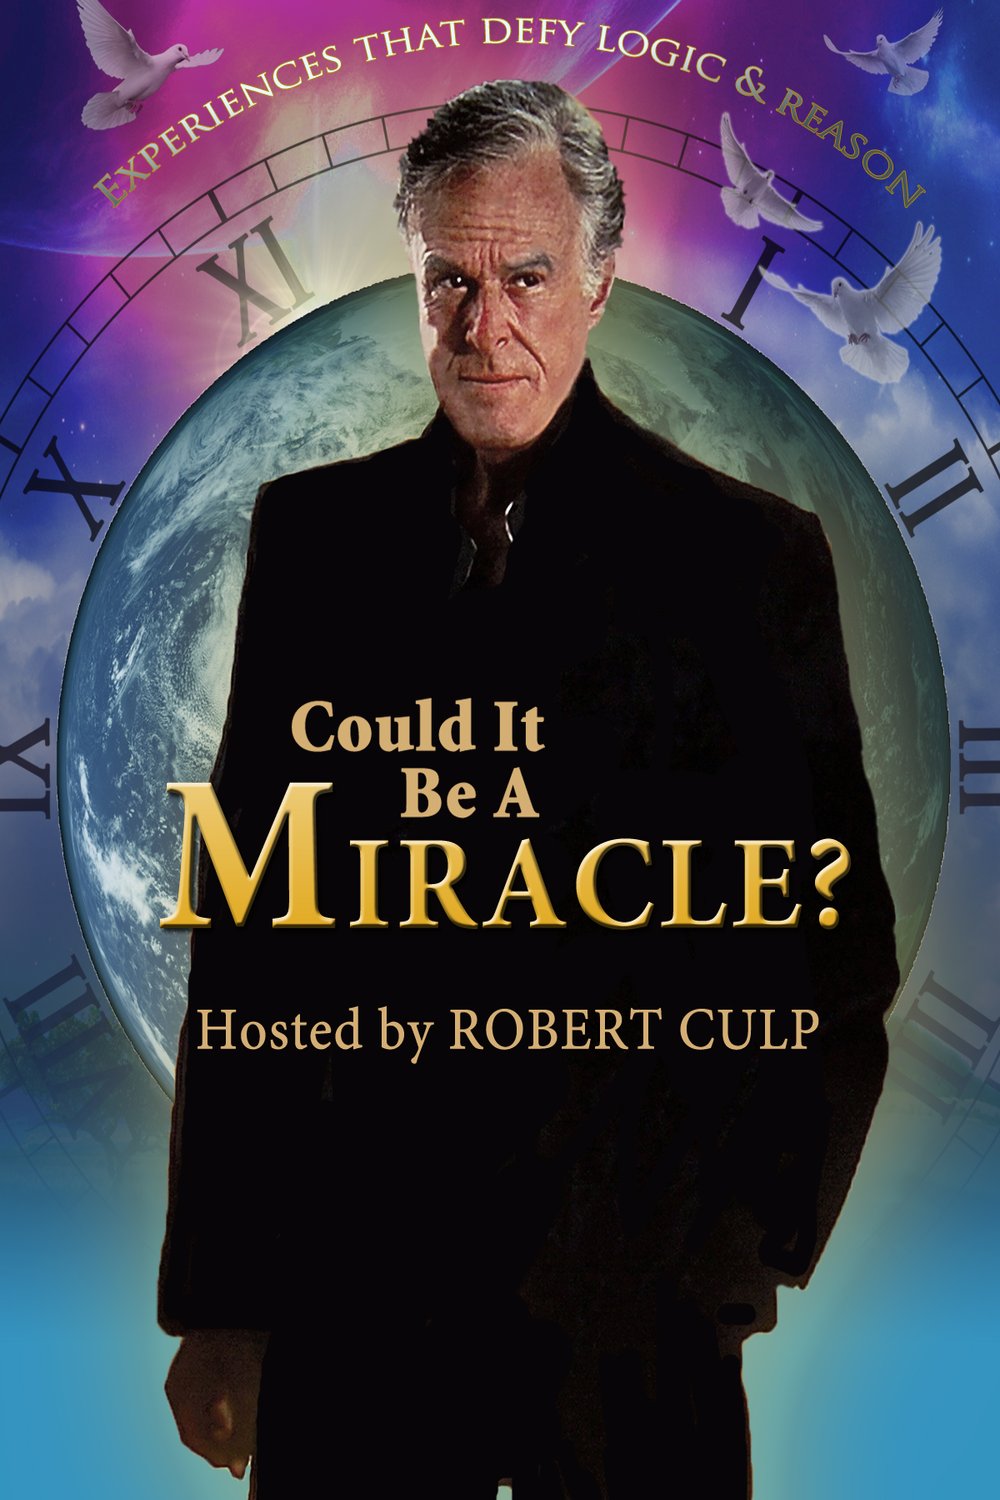 Poster of the movie Could It Be a Miracle?